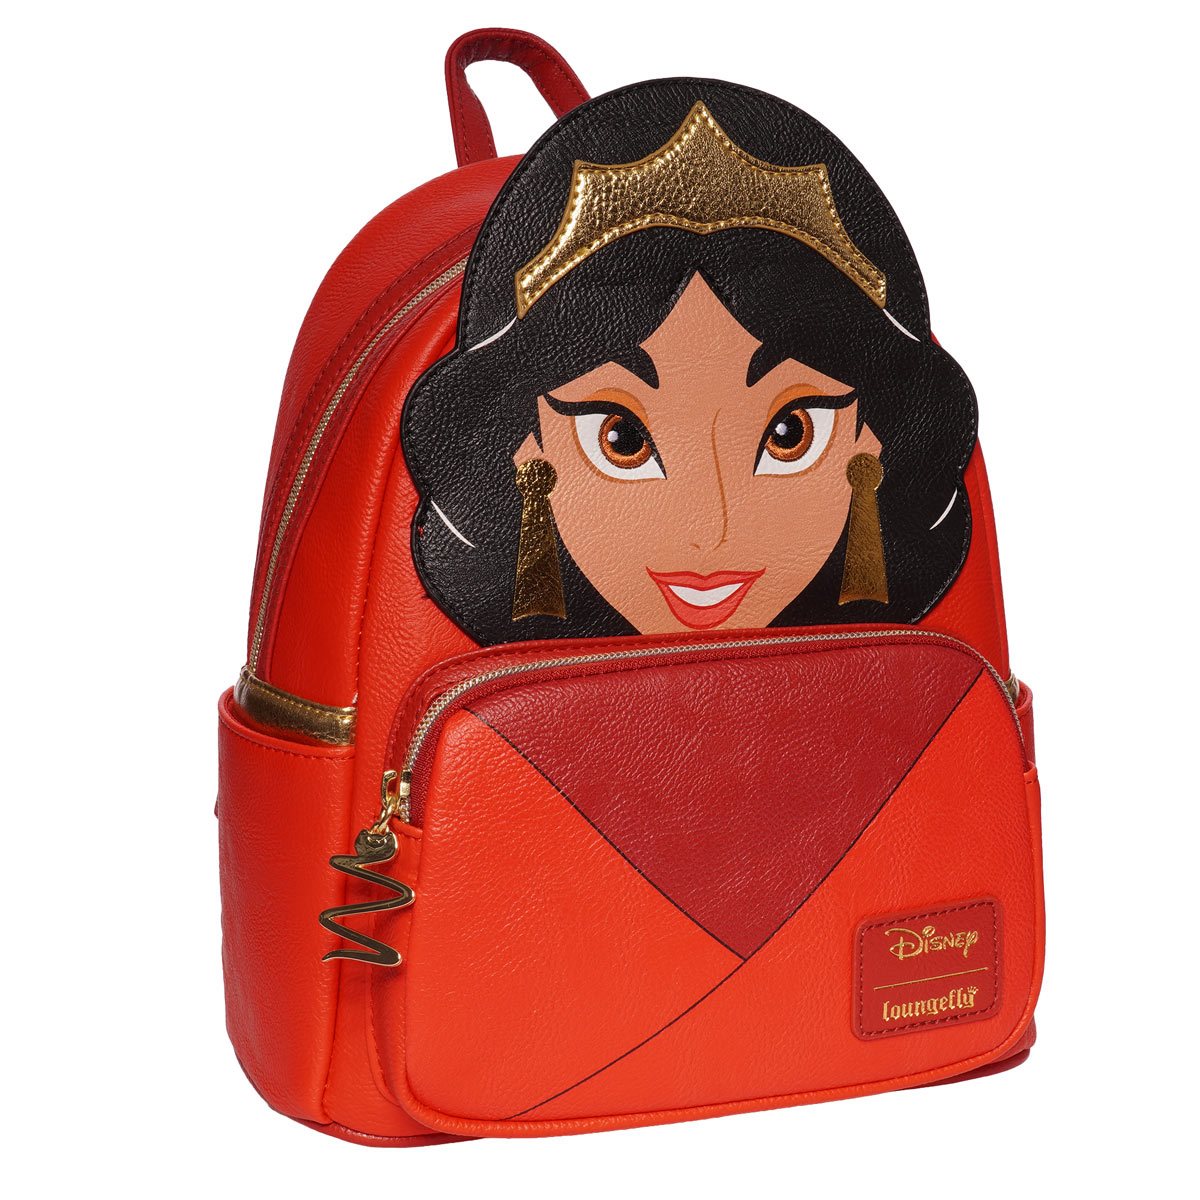 Princess Jasmine Artwork on a Louis Vuitton bag - commissioned by